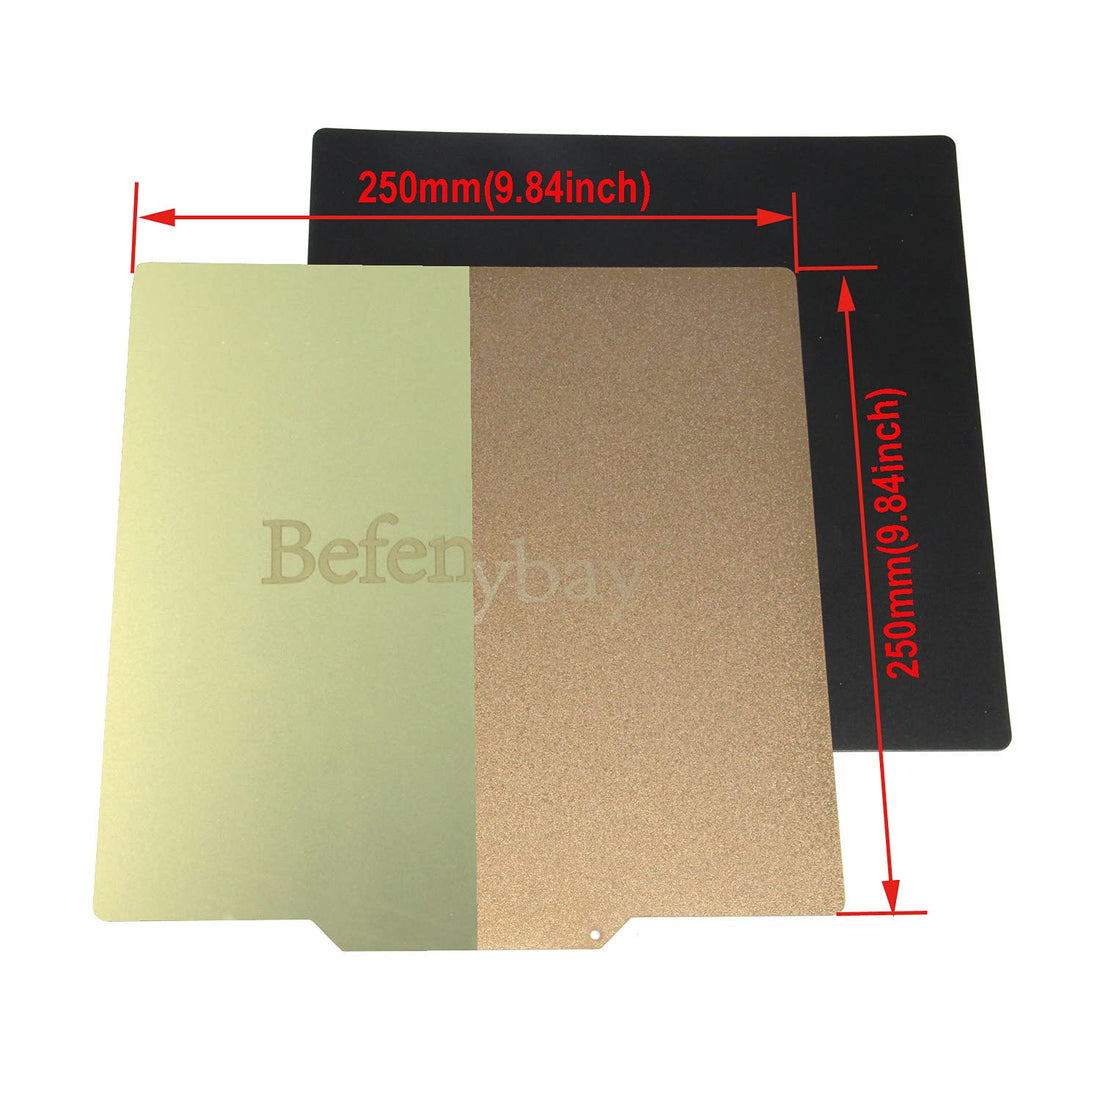 Befenybay Flexible Removable Double Side (Powder Coated + Smooth Coated) PEI Metal Sheet Bed Magnetic Heated Bed Build Surface 250x250mm for 3D Printer (250x250mm-Double Side)